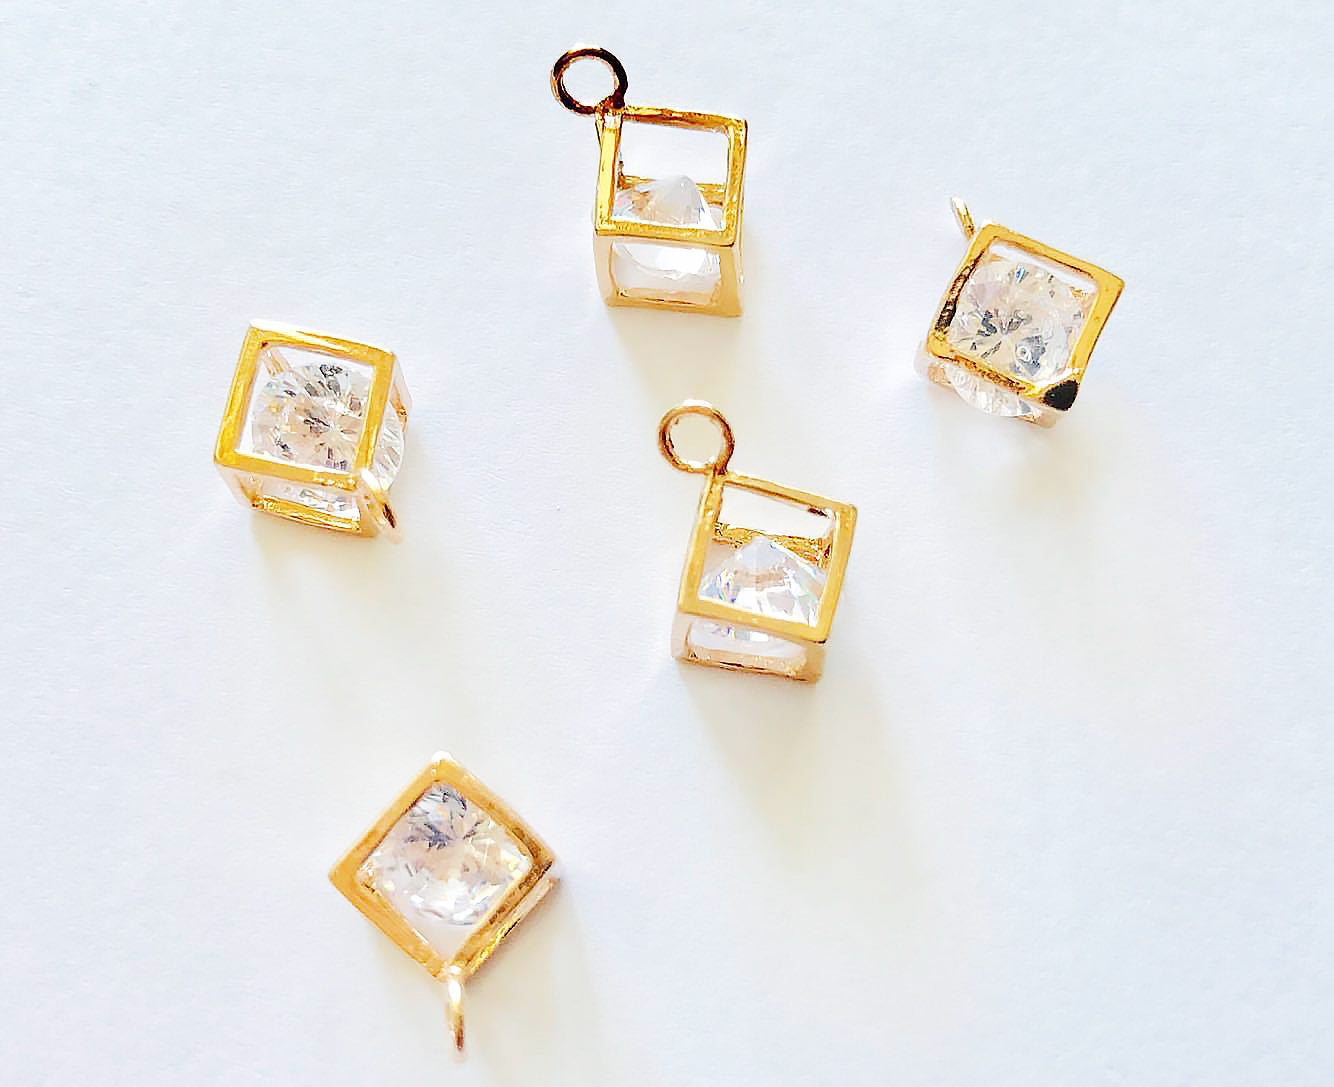 8x8mm 14k Gold Plated Square Frame Pendant Charm